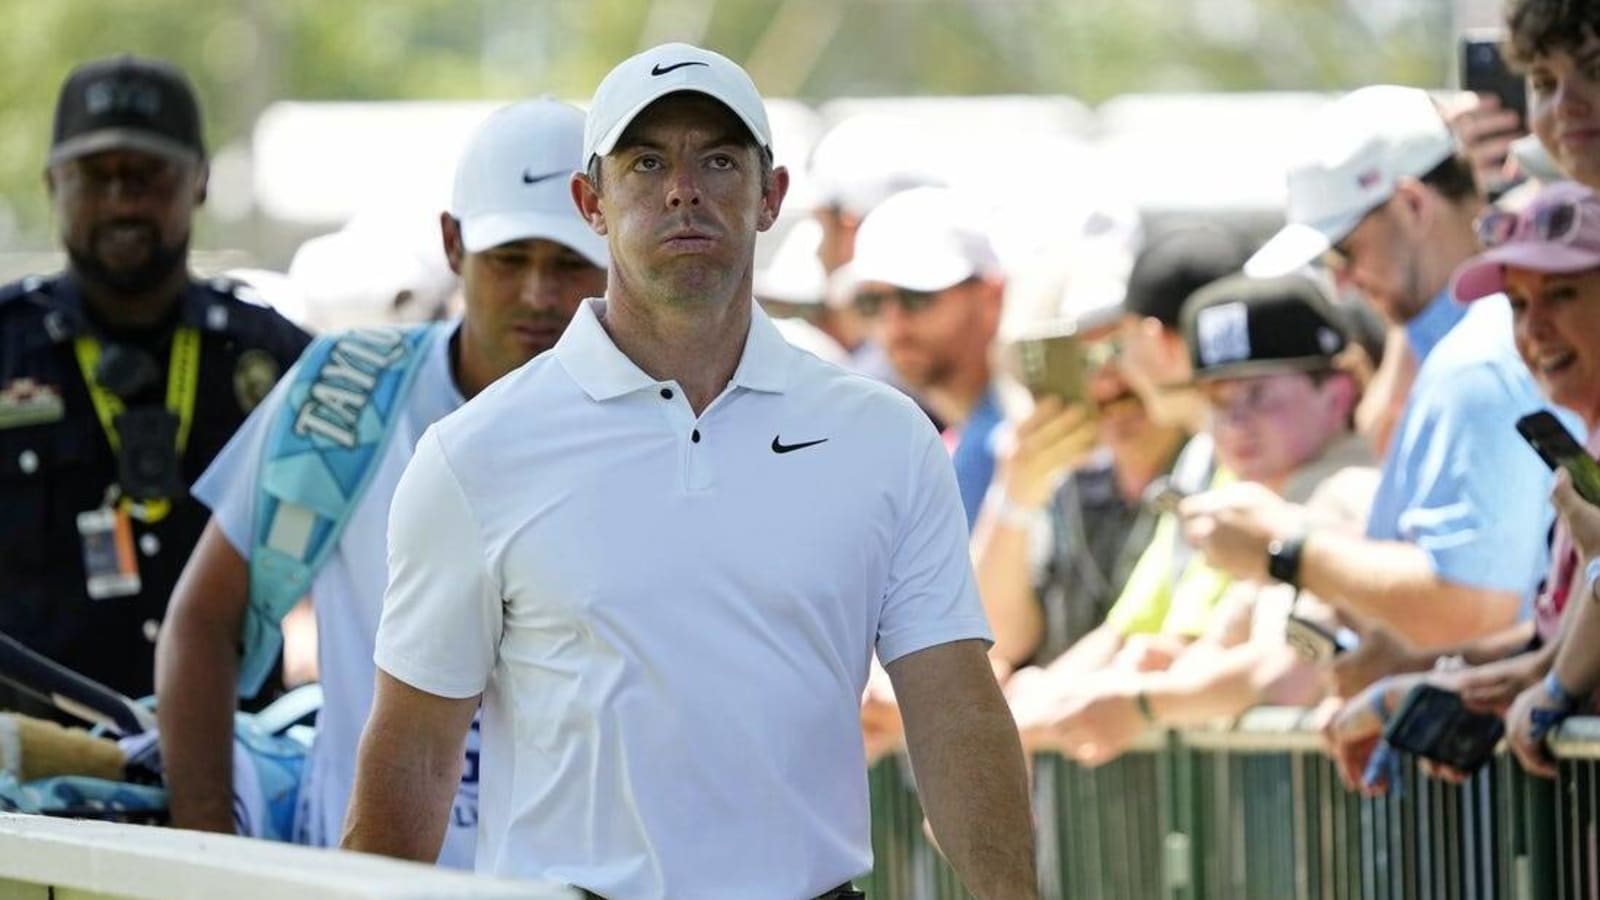 Rory McIlroy rues six-hole stretch, but game ‘clicking more’